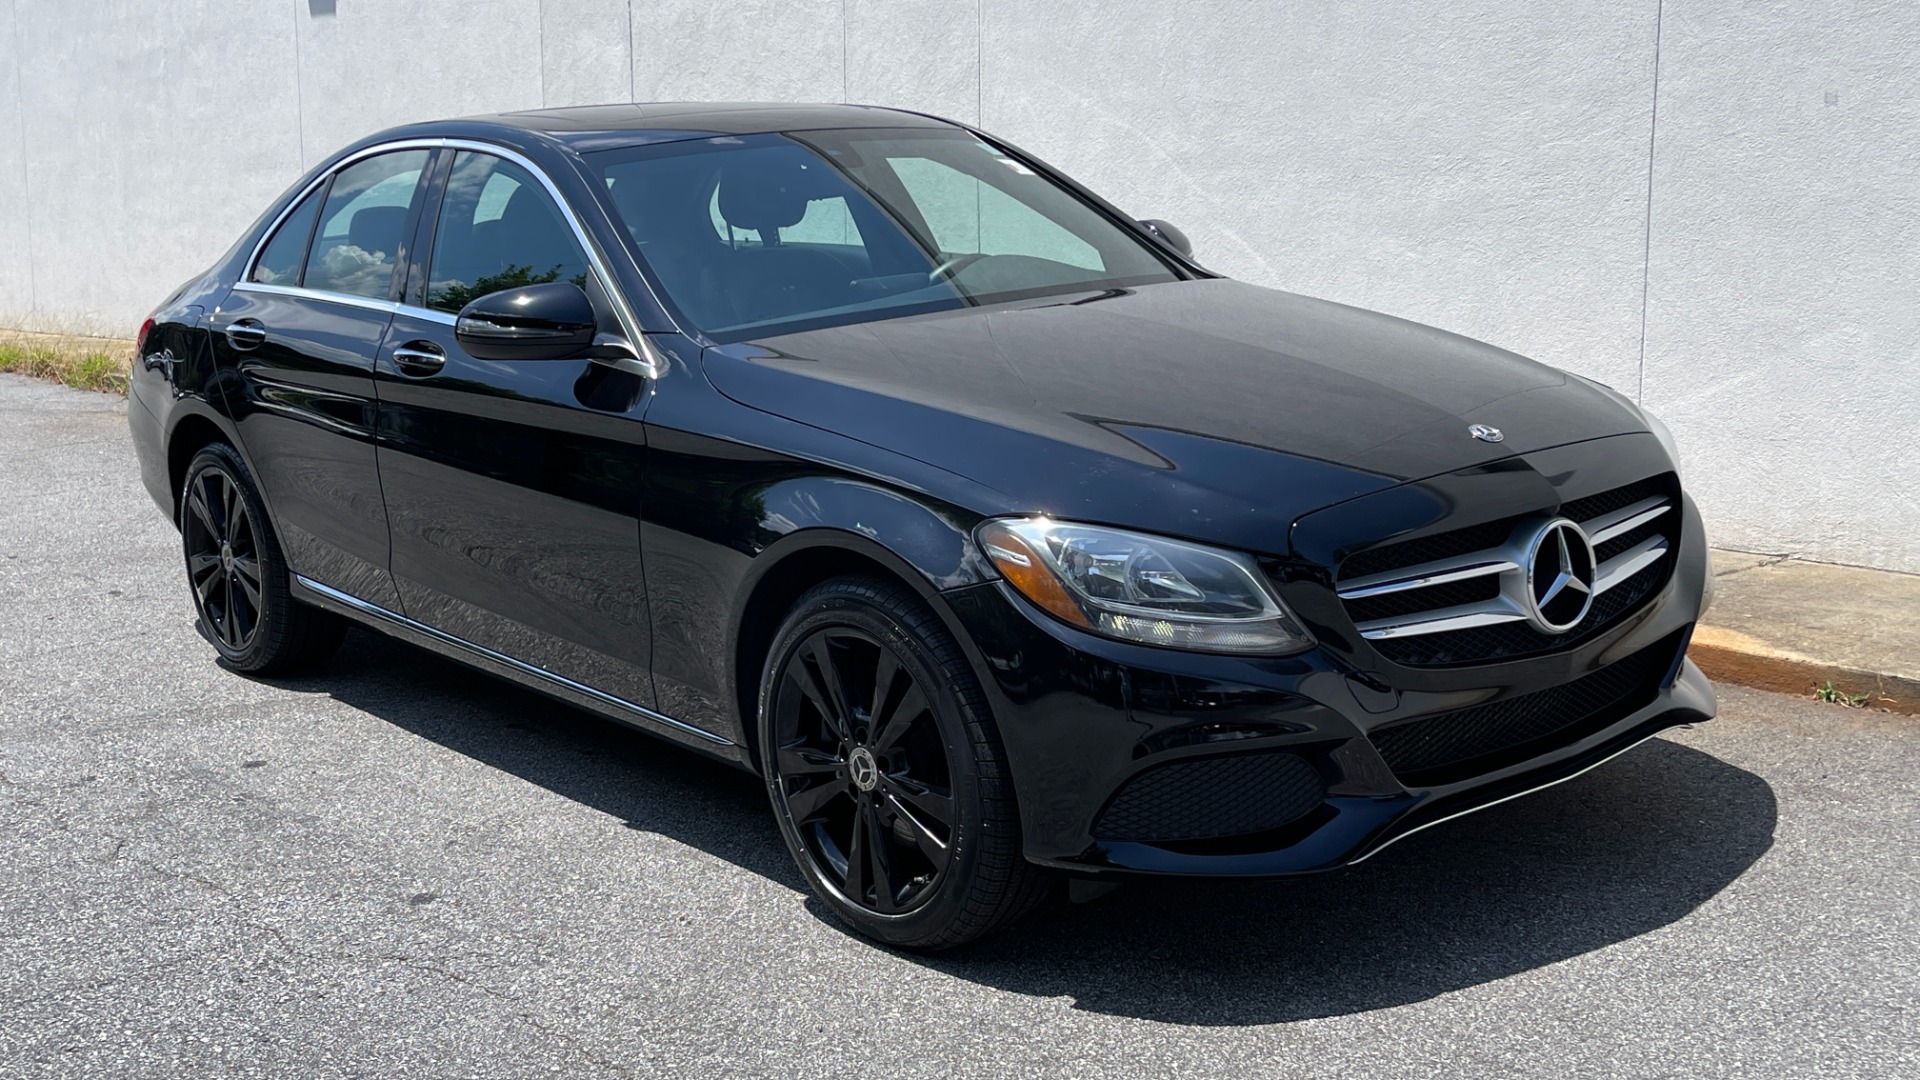 Used 2018 Mercedes-Benz C-Class C 300 / PREMIUM / REVIEW CAM / HTD SEATS / 18IN WHEELS for sale $27,999 at Formula Imports in Charlotte NC 28227 3